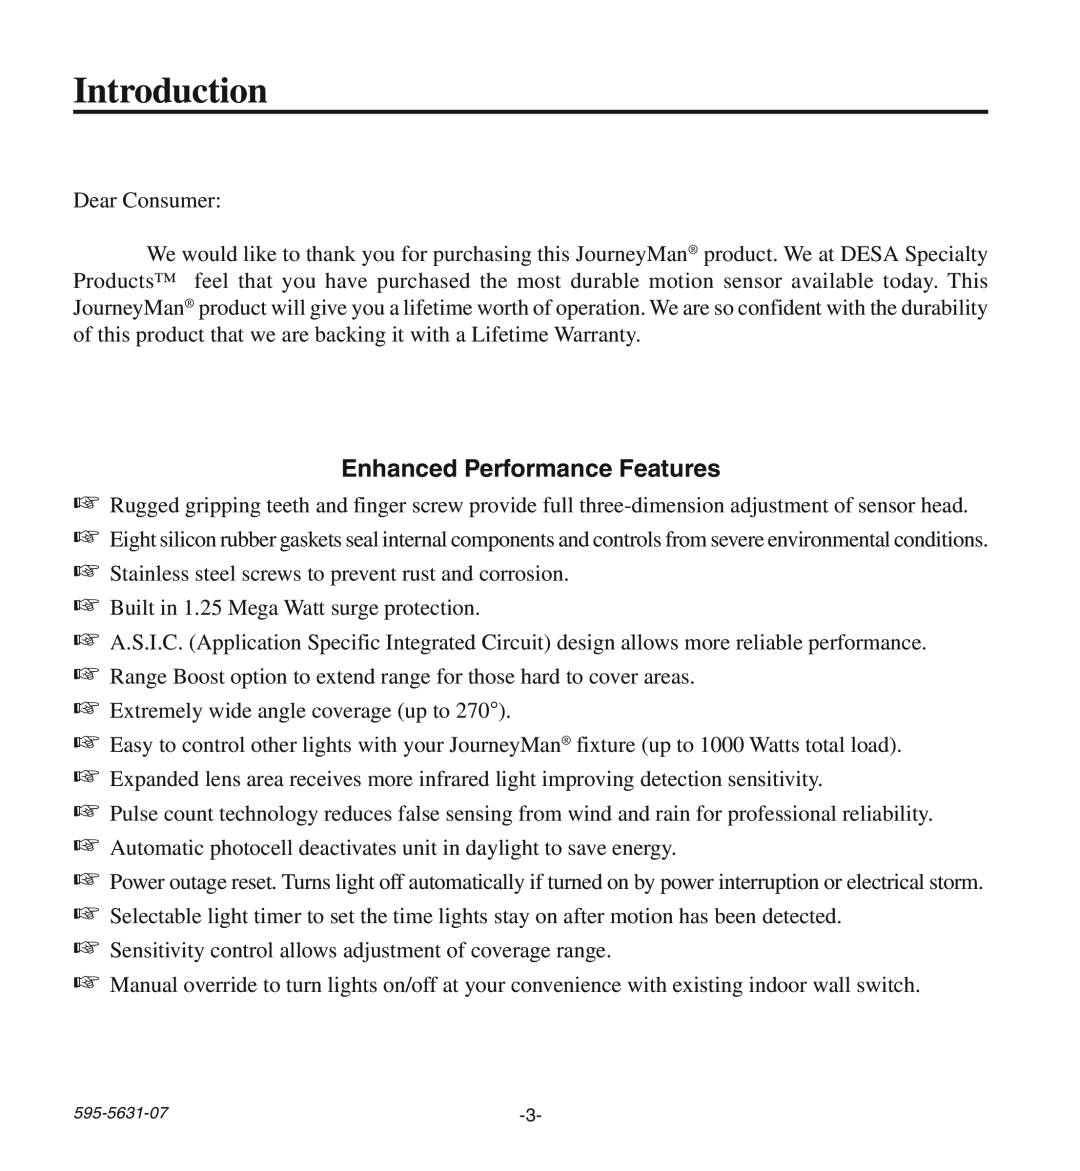 Desa HD-9240 manual Introduction, Enhanced Performance Features 